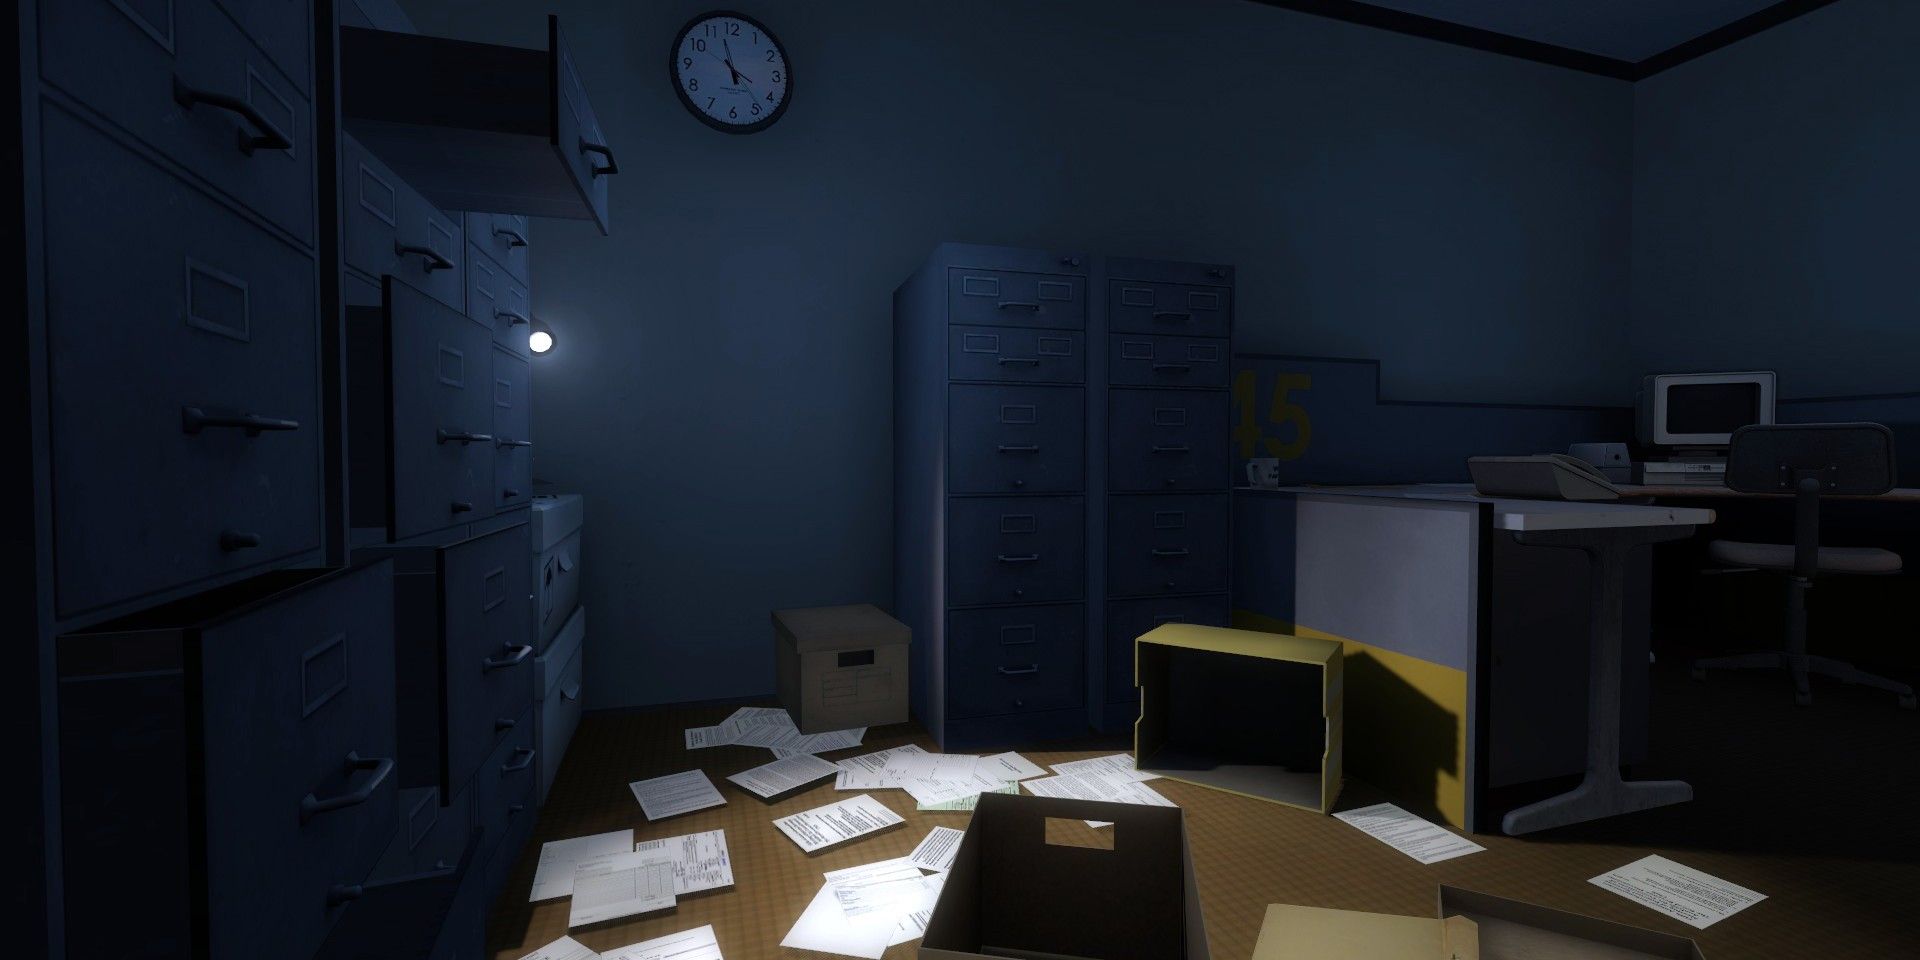 Stanley Parable destroyed office